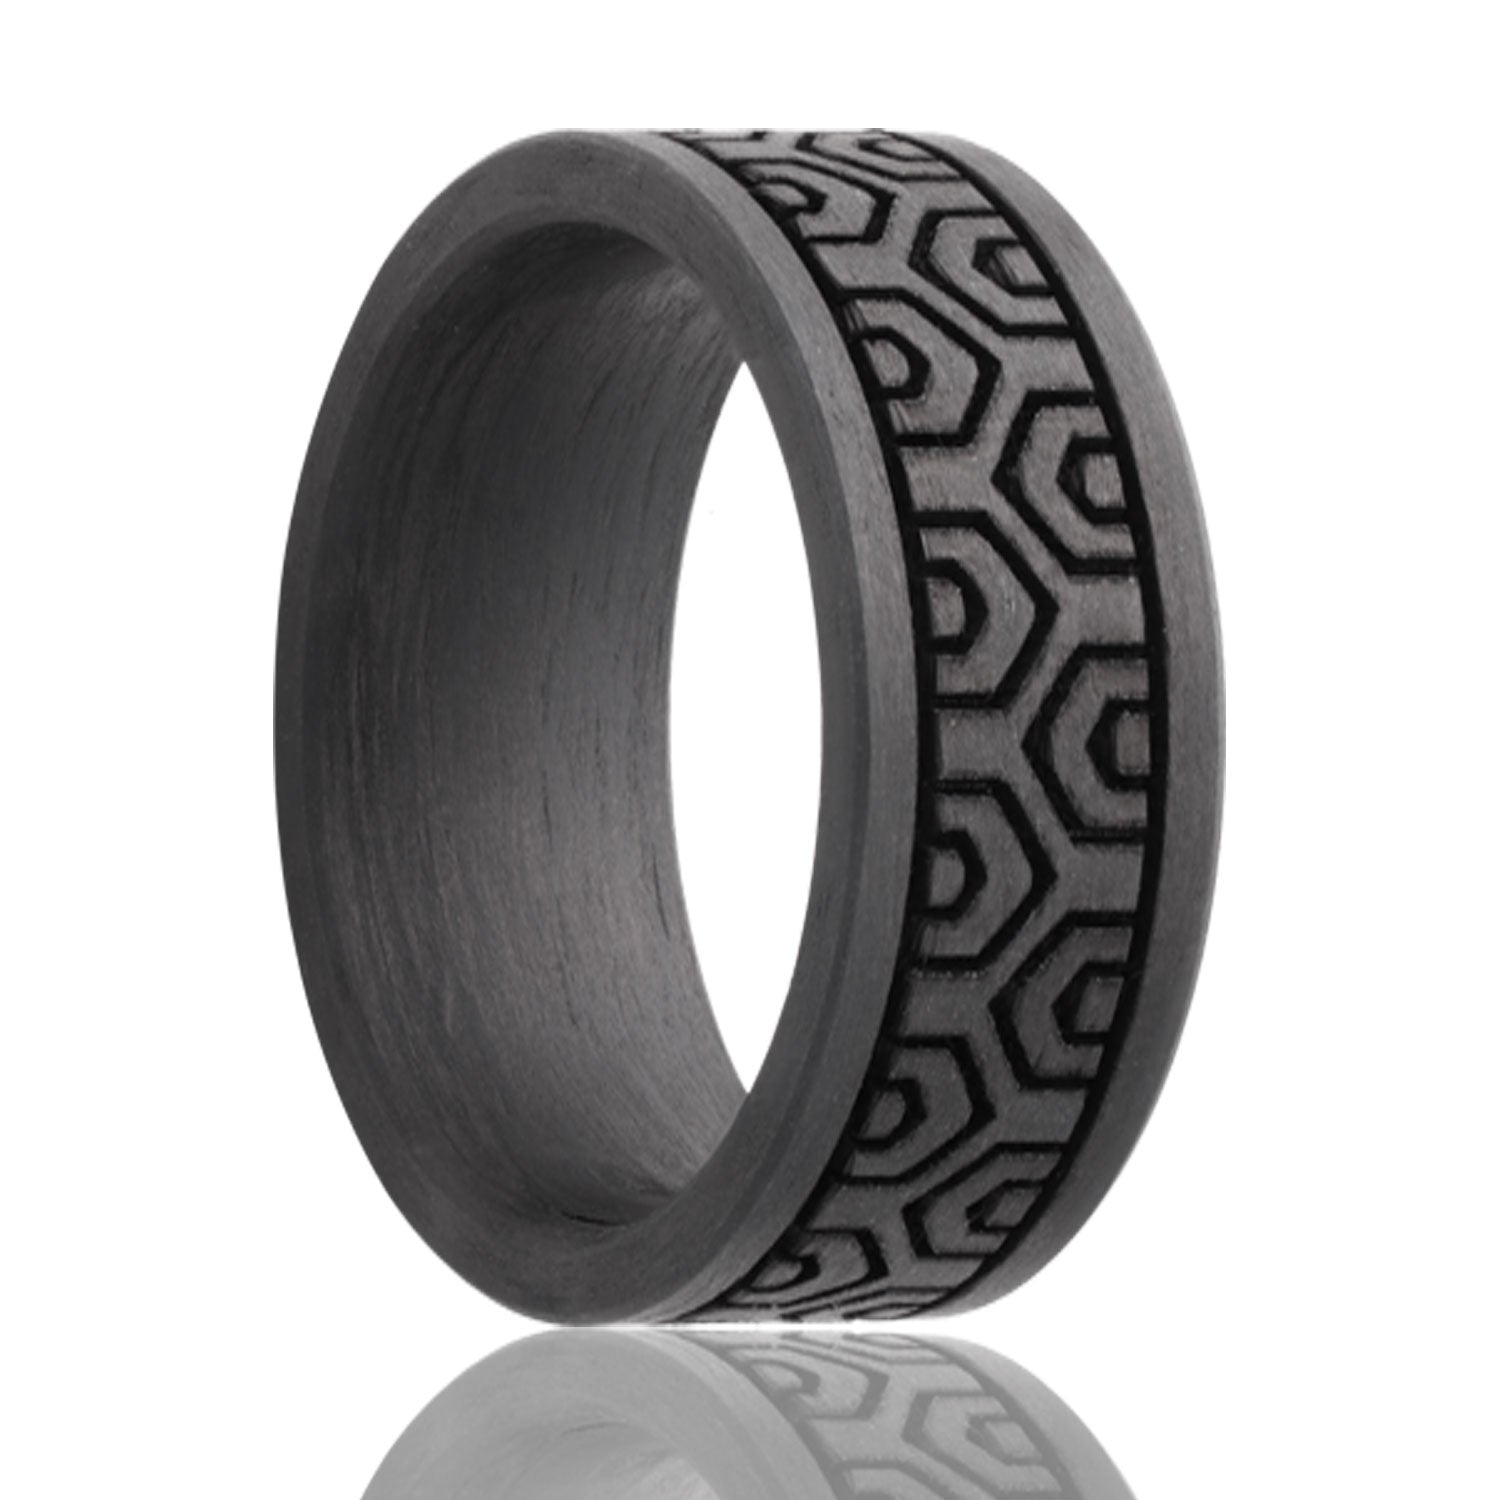 A hexagon grid carbon fiber men's wedding band displayed on a neutral white background.